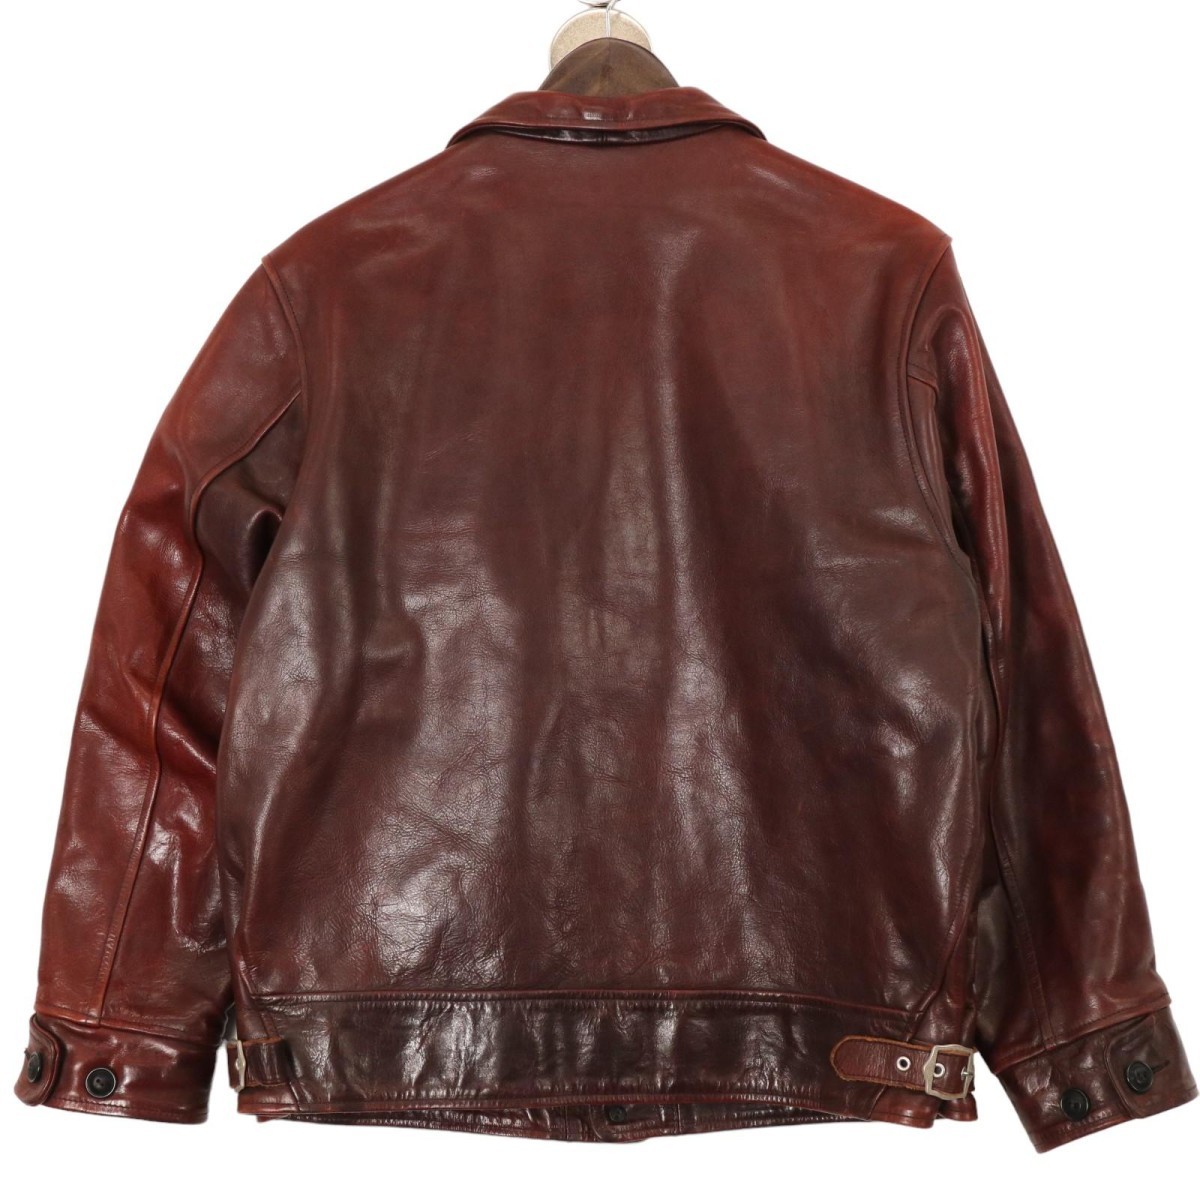 Dapper's / A-1 TYPE LEATHER SPORTS JACKET ダッパーズ レザー スポーツジャケット 革ジャン 1033 表記サイズ42_画像2